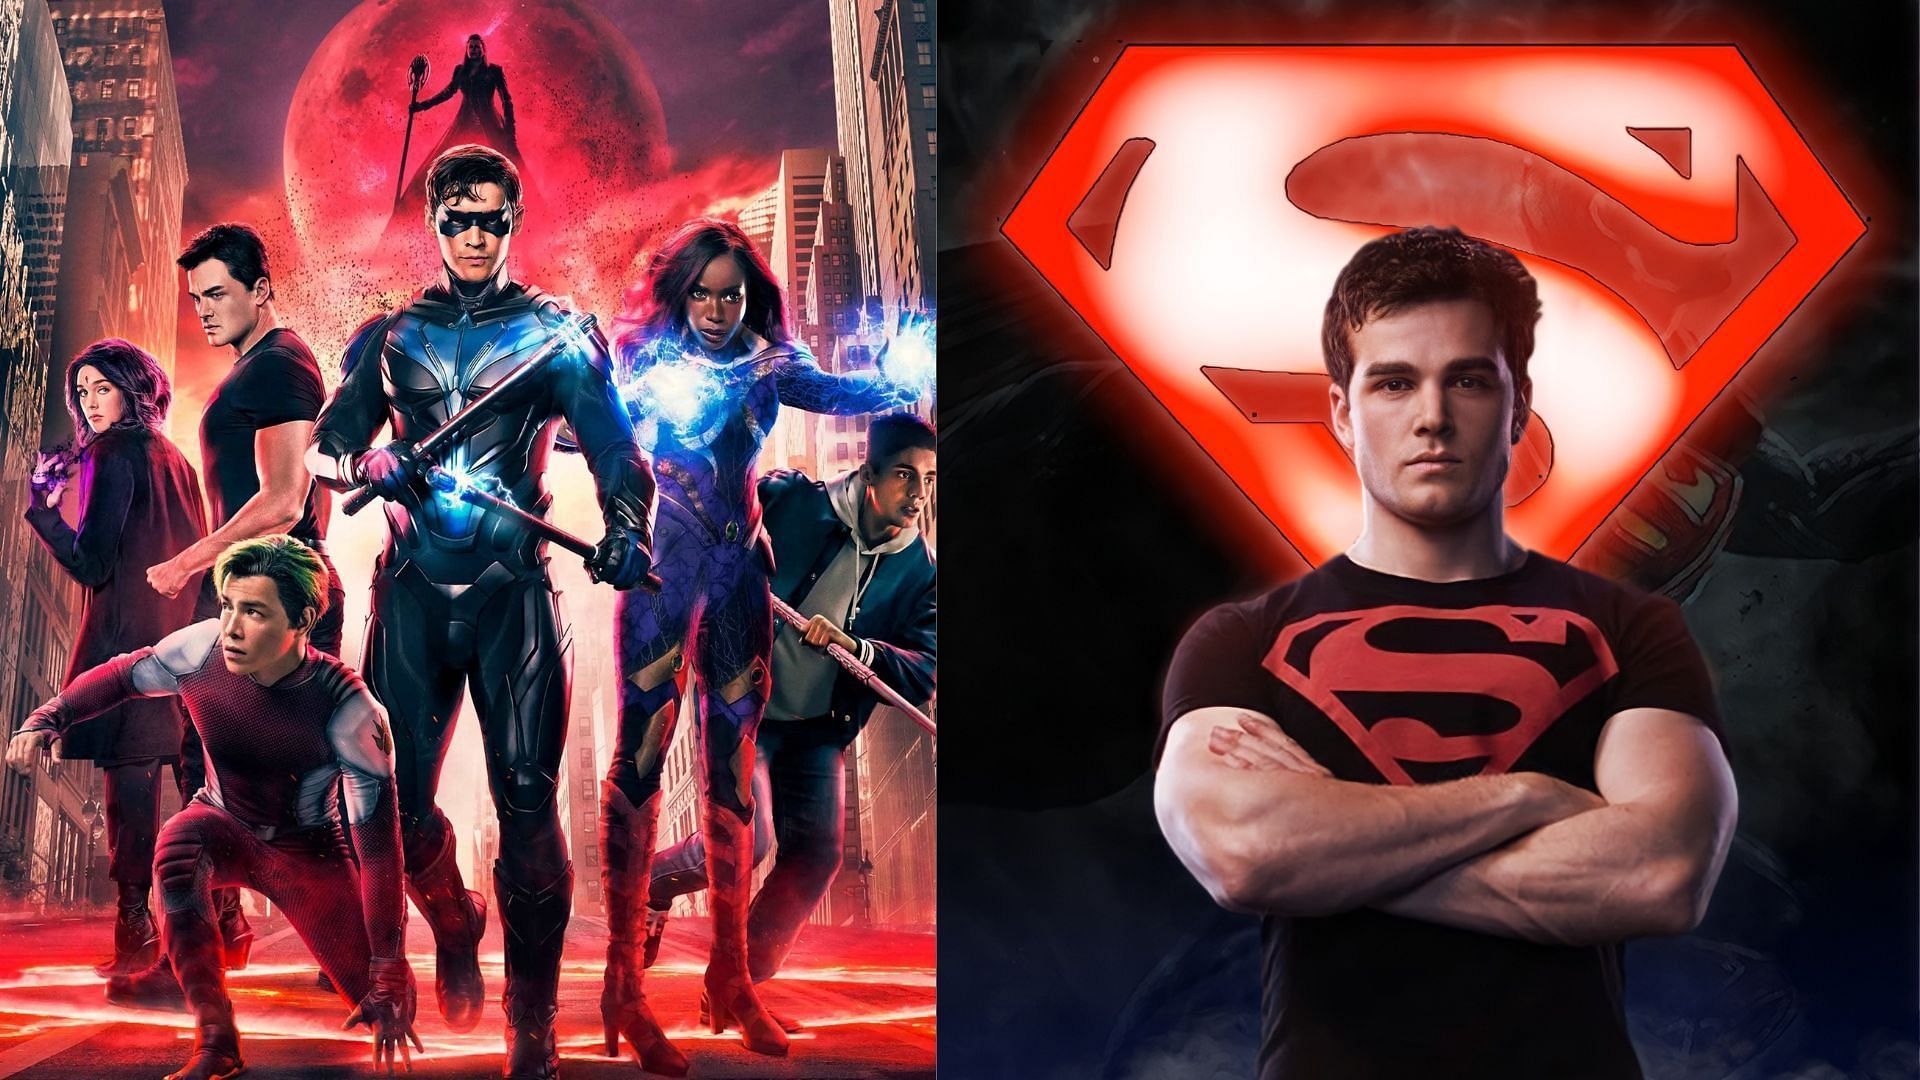 Superboy actor Joshua Orpin reveals potential story ideas for his character if Titans was ever brought back for Season 5 (Images via DC)